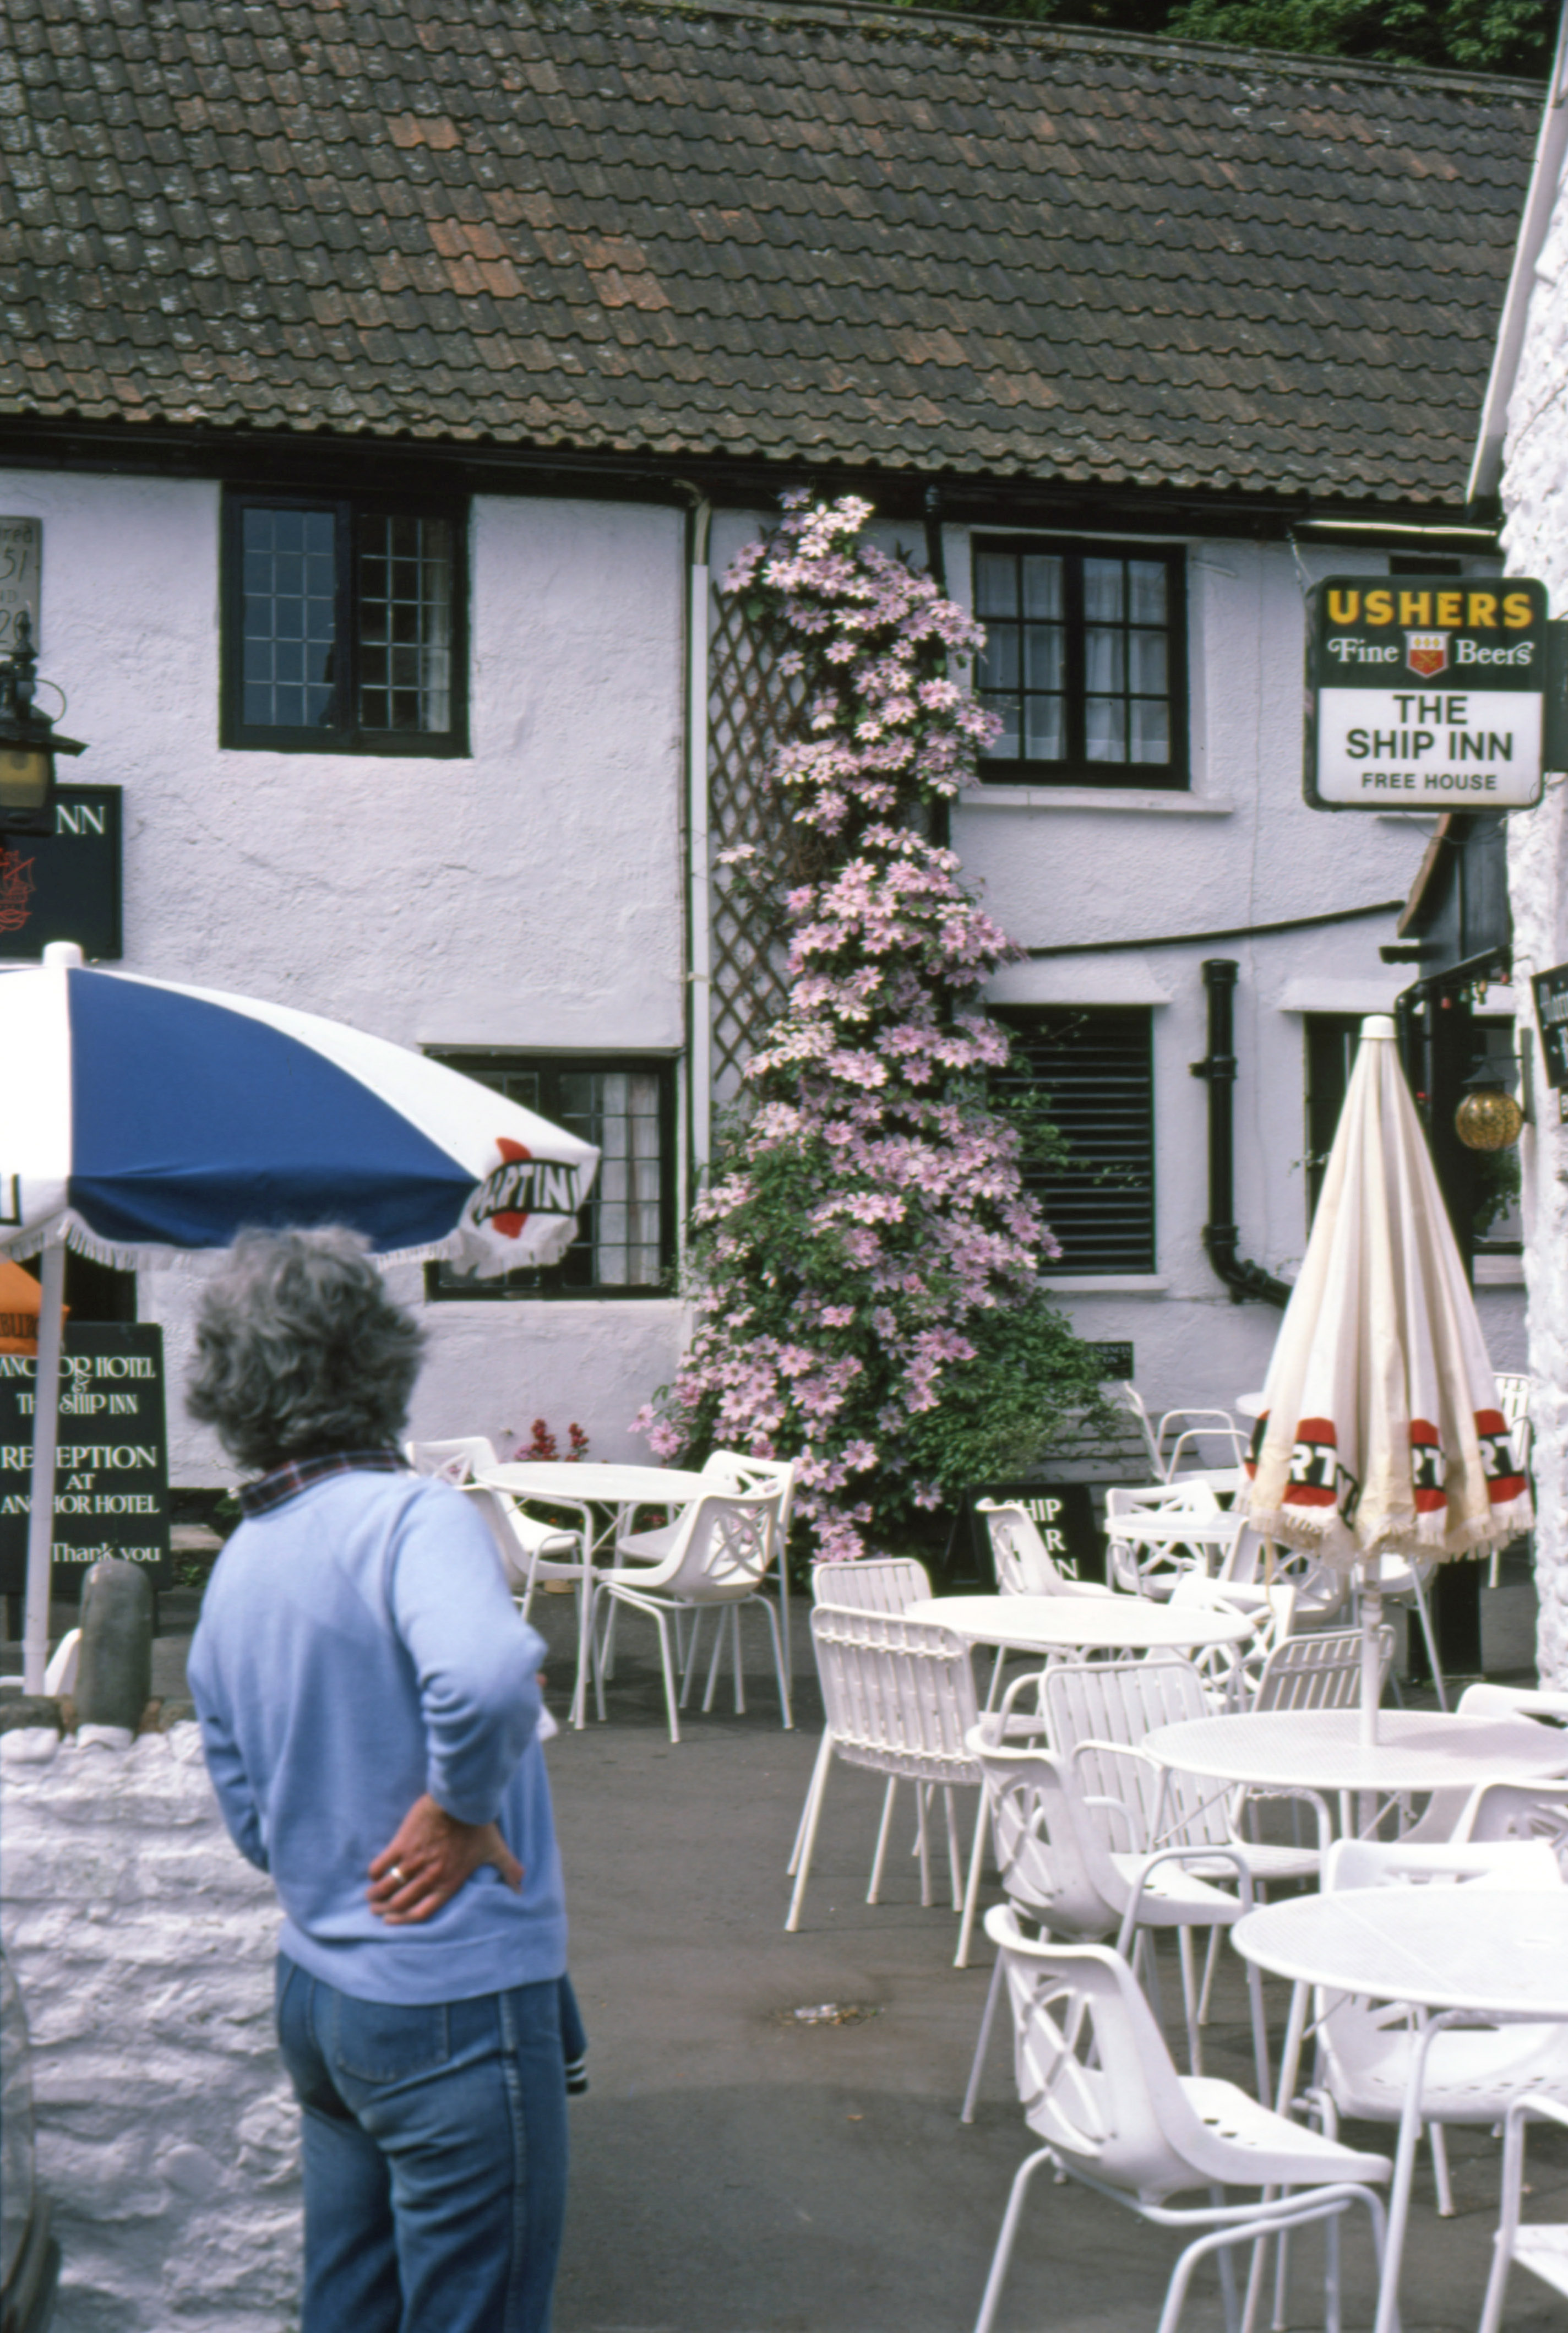 8508512 June 1985 - A beautiful Clematis we saw when on holiday on Exmoor. From the last colour slide film I took.